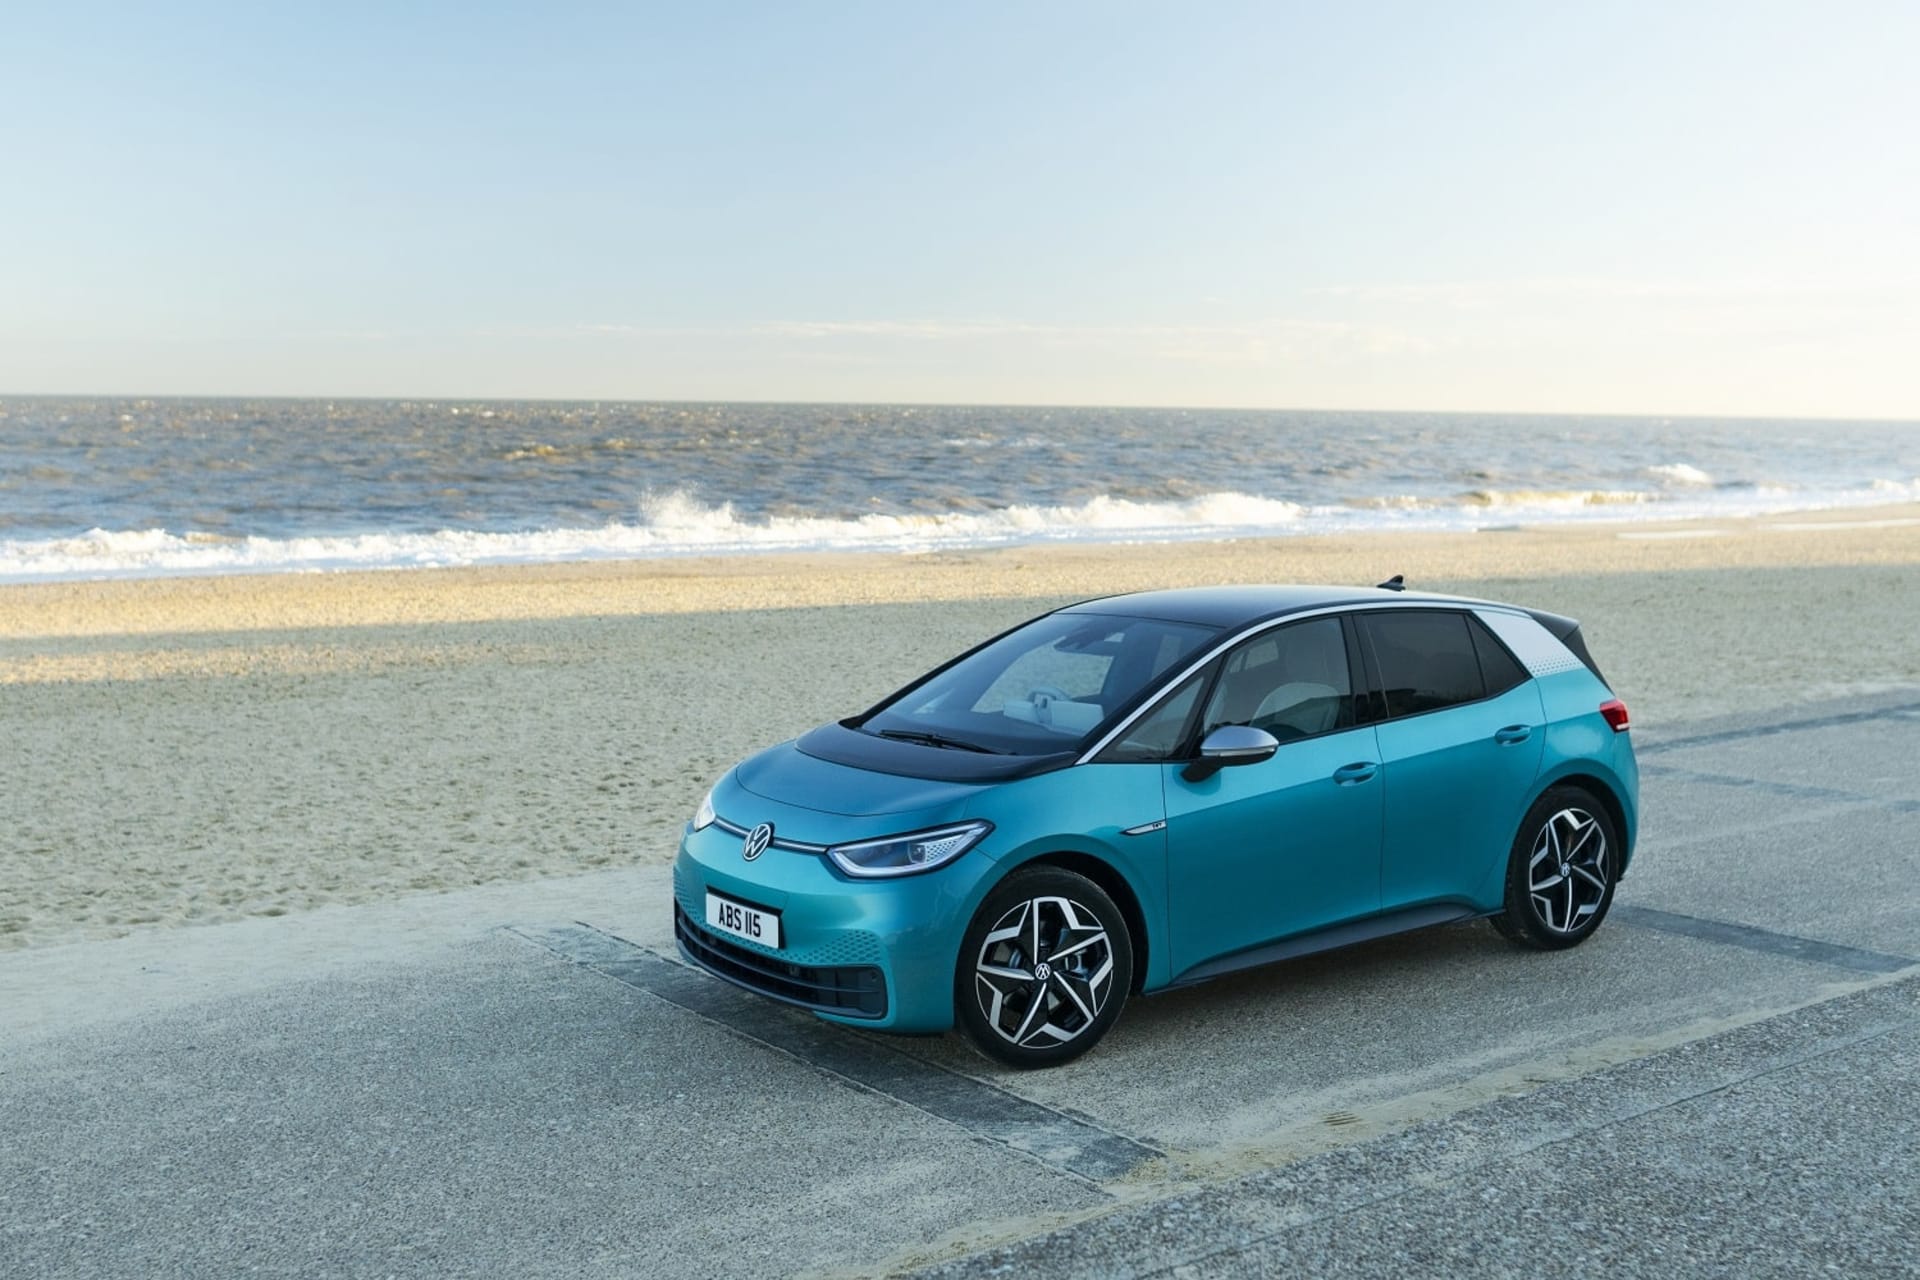 Can you buy a brand new electric car for under £30,000?